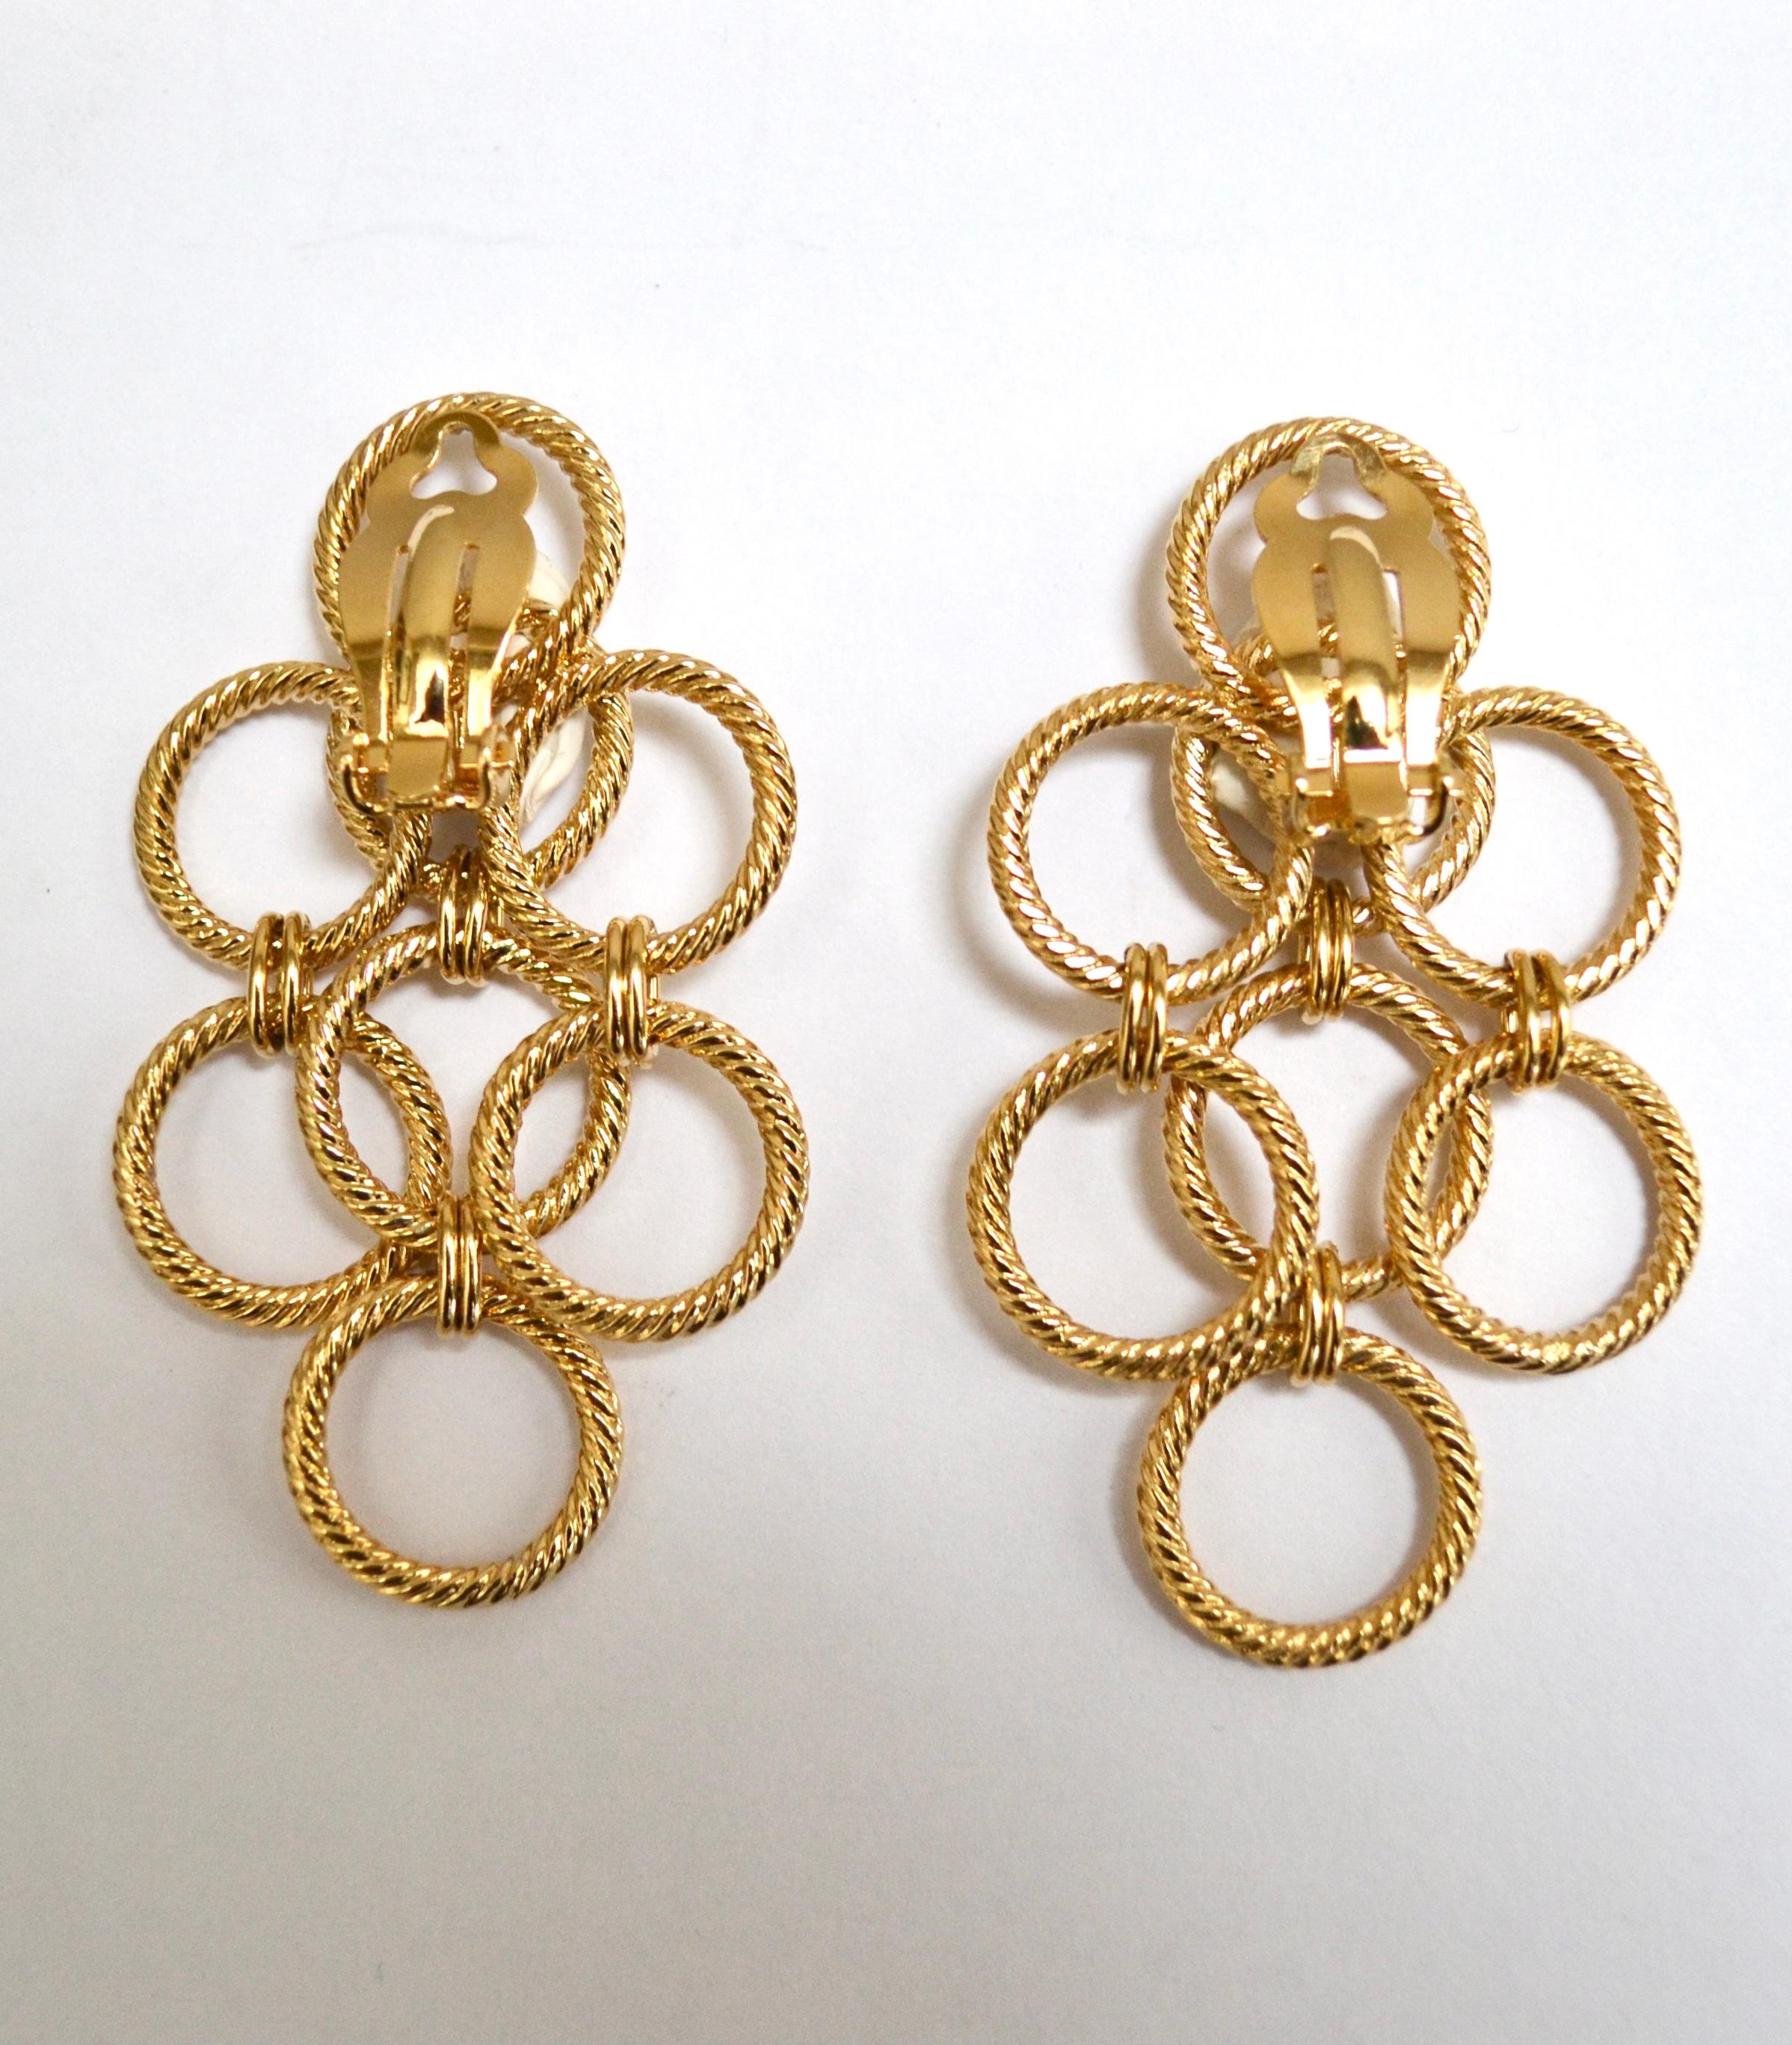 24-carat gilded bronze braided metal.An intricate design of different circles create an amazing statement earring.
Sylvie Blet, the designer was Robert Goossens personal assistant in all of his creations. She worked by his side for 20 years creating